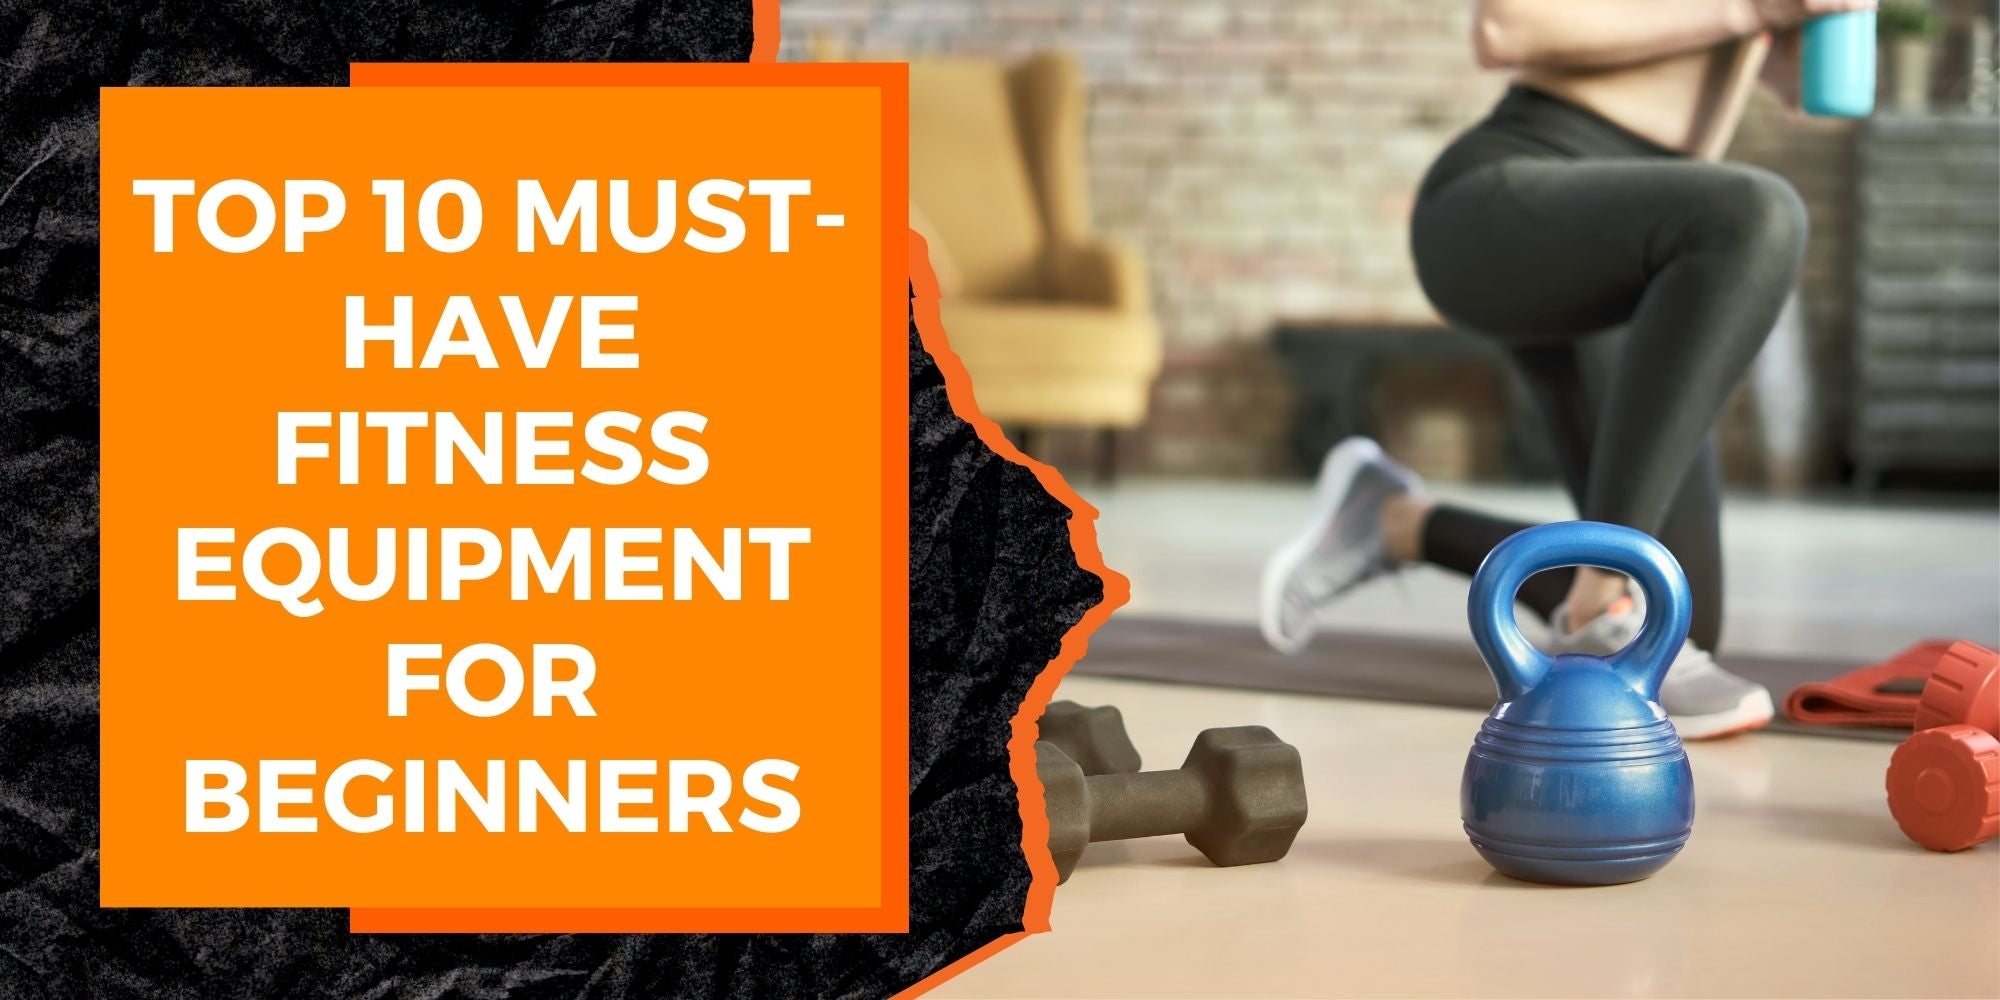 The Top 10 Must-Have Fitness Equipment for Beginners